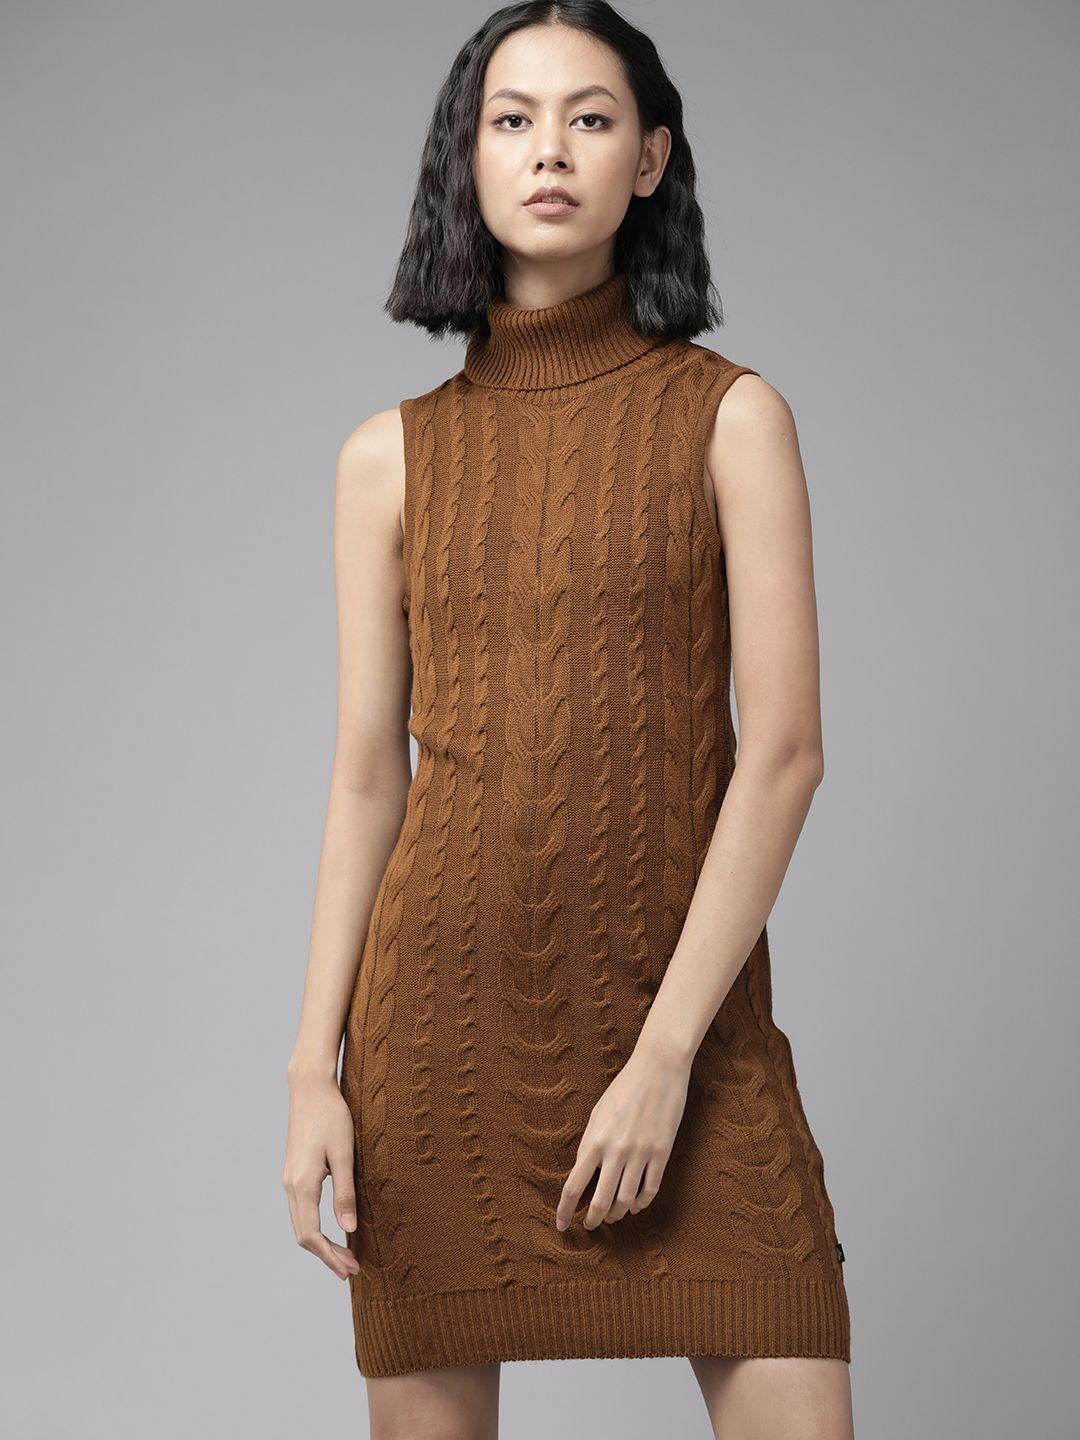 the roadster lifestyle co. brown cable knit jumper dress